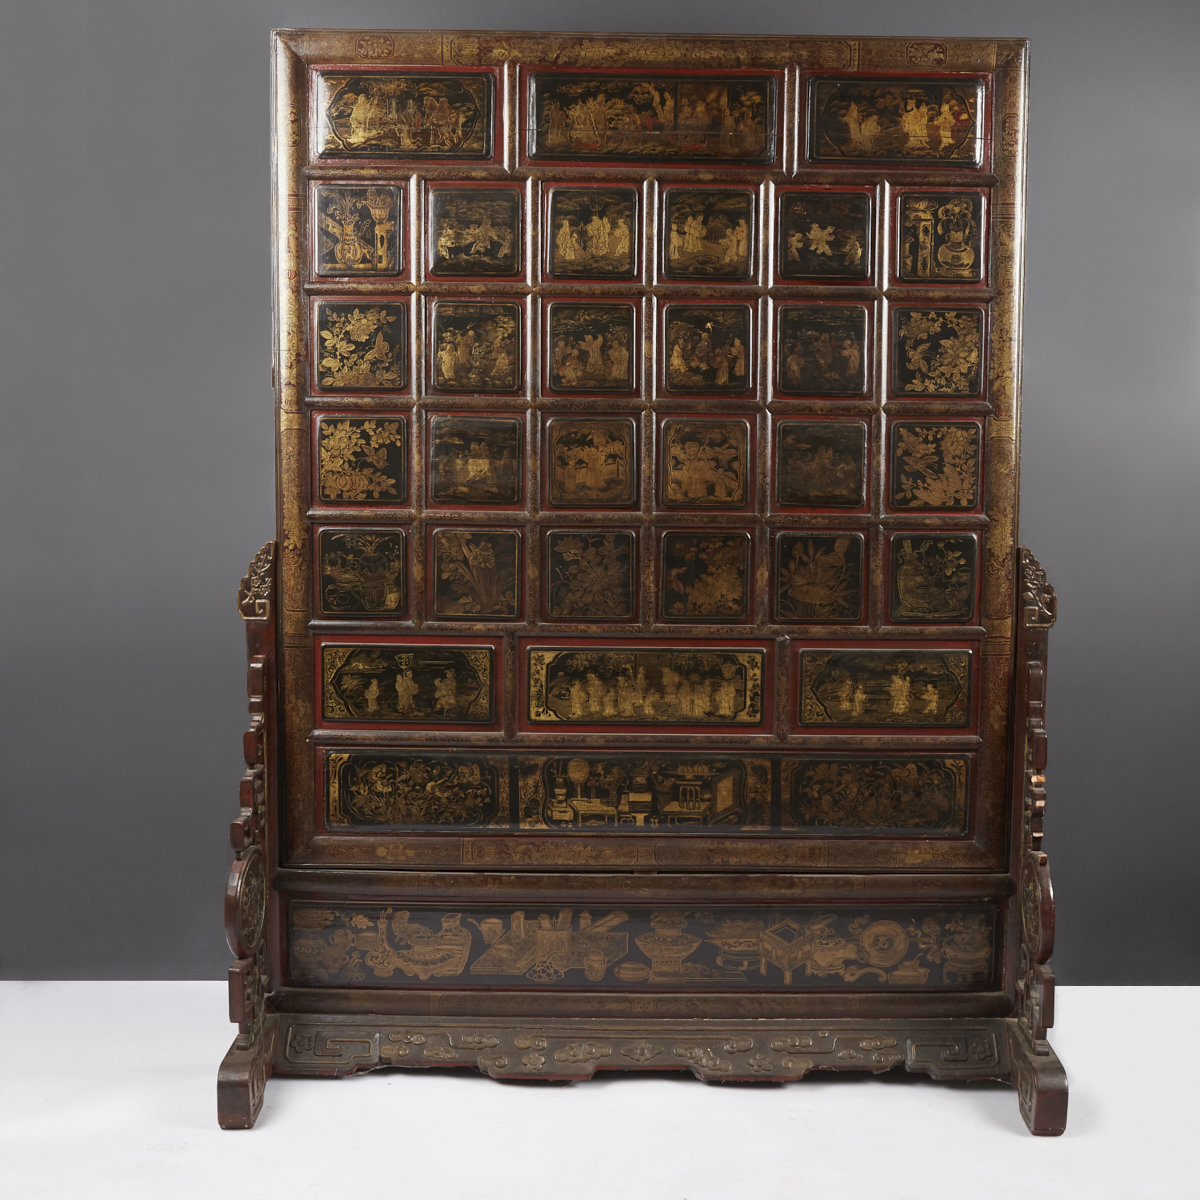 19th Century Chinese Room Divider or Screen - Image 2 of 6